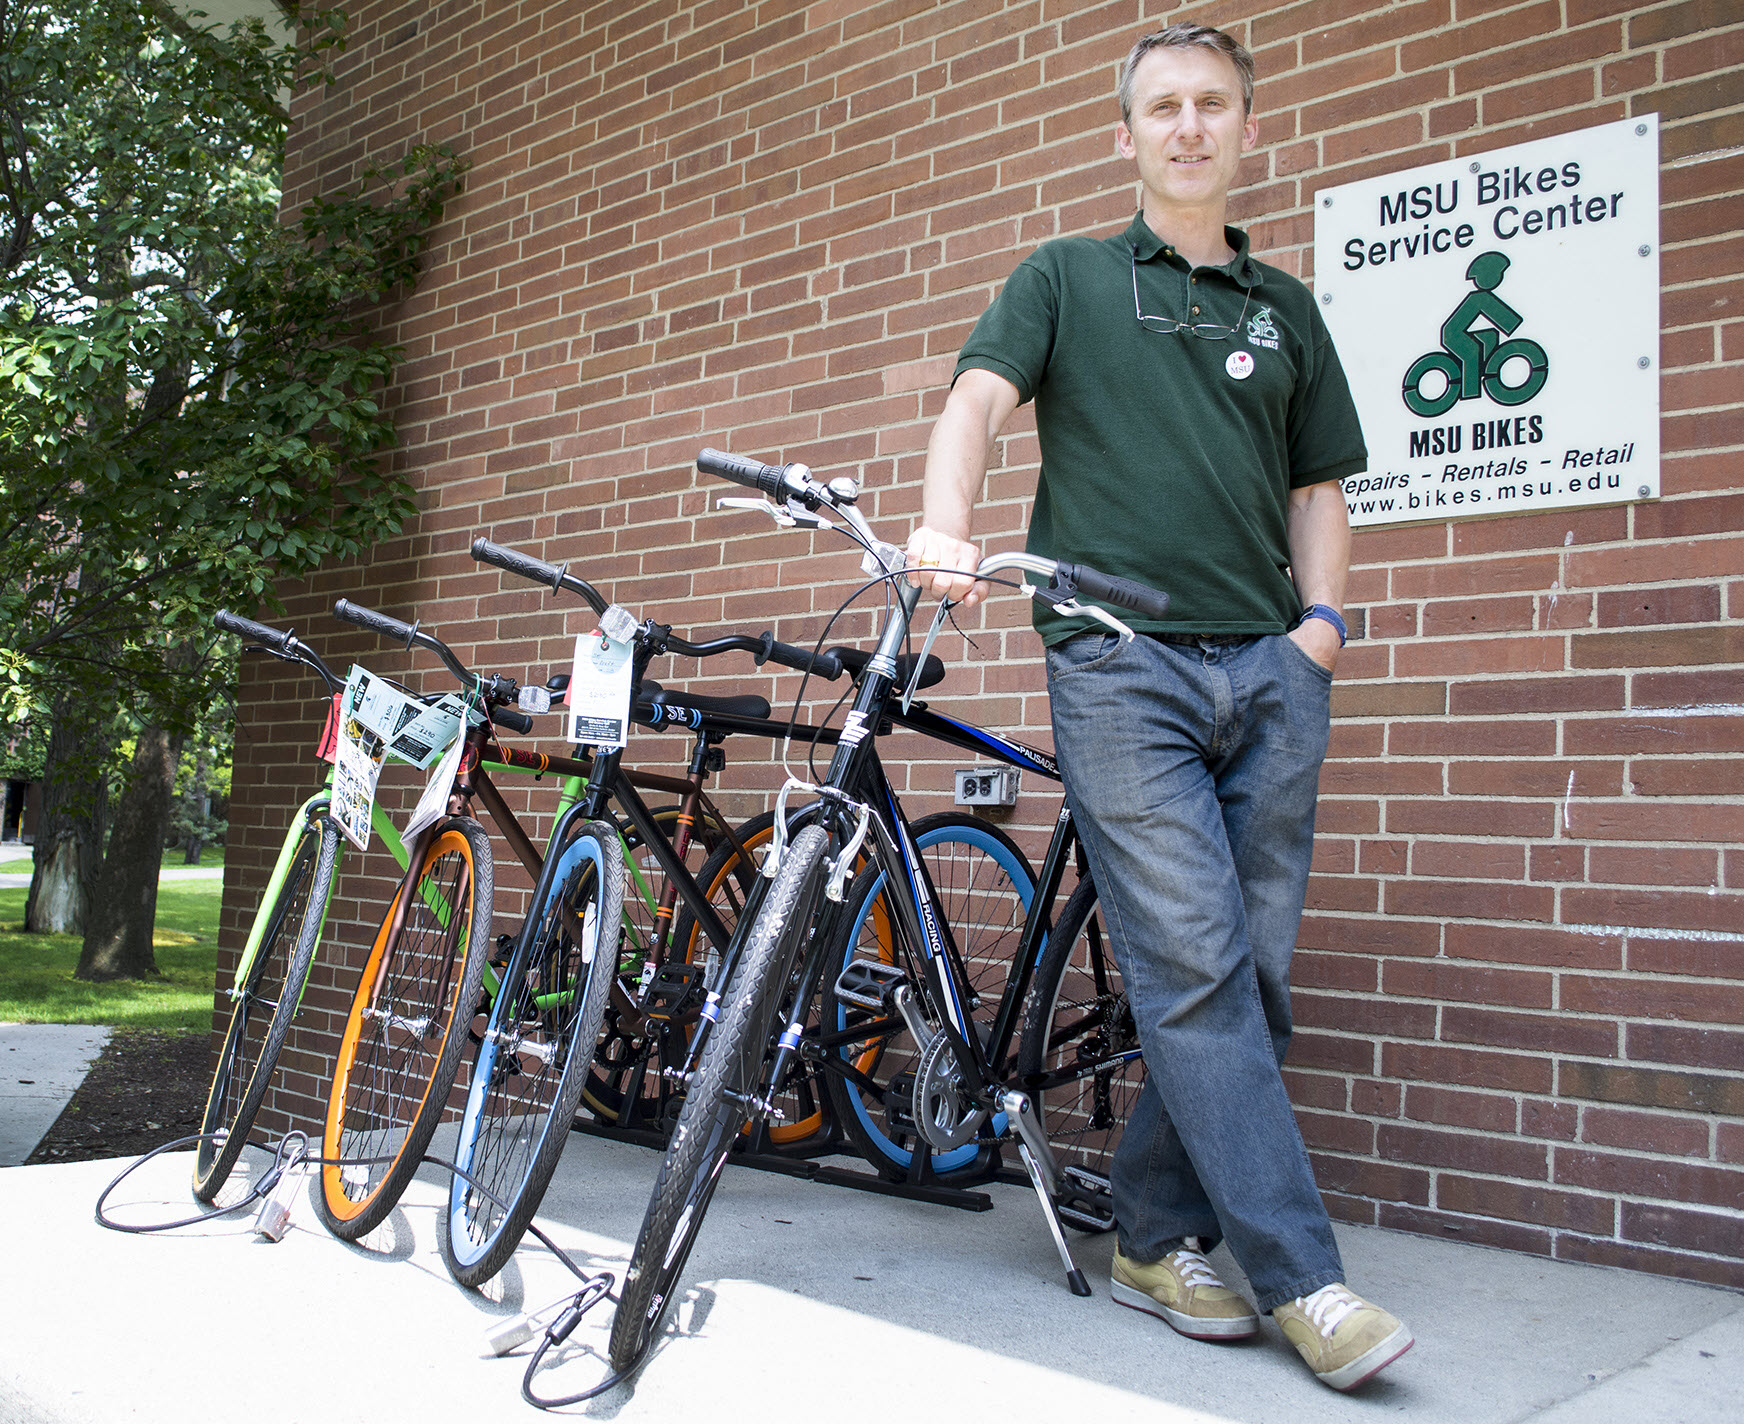 Tim Potter standing in front of the MSU Bikes Service Center